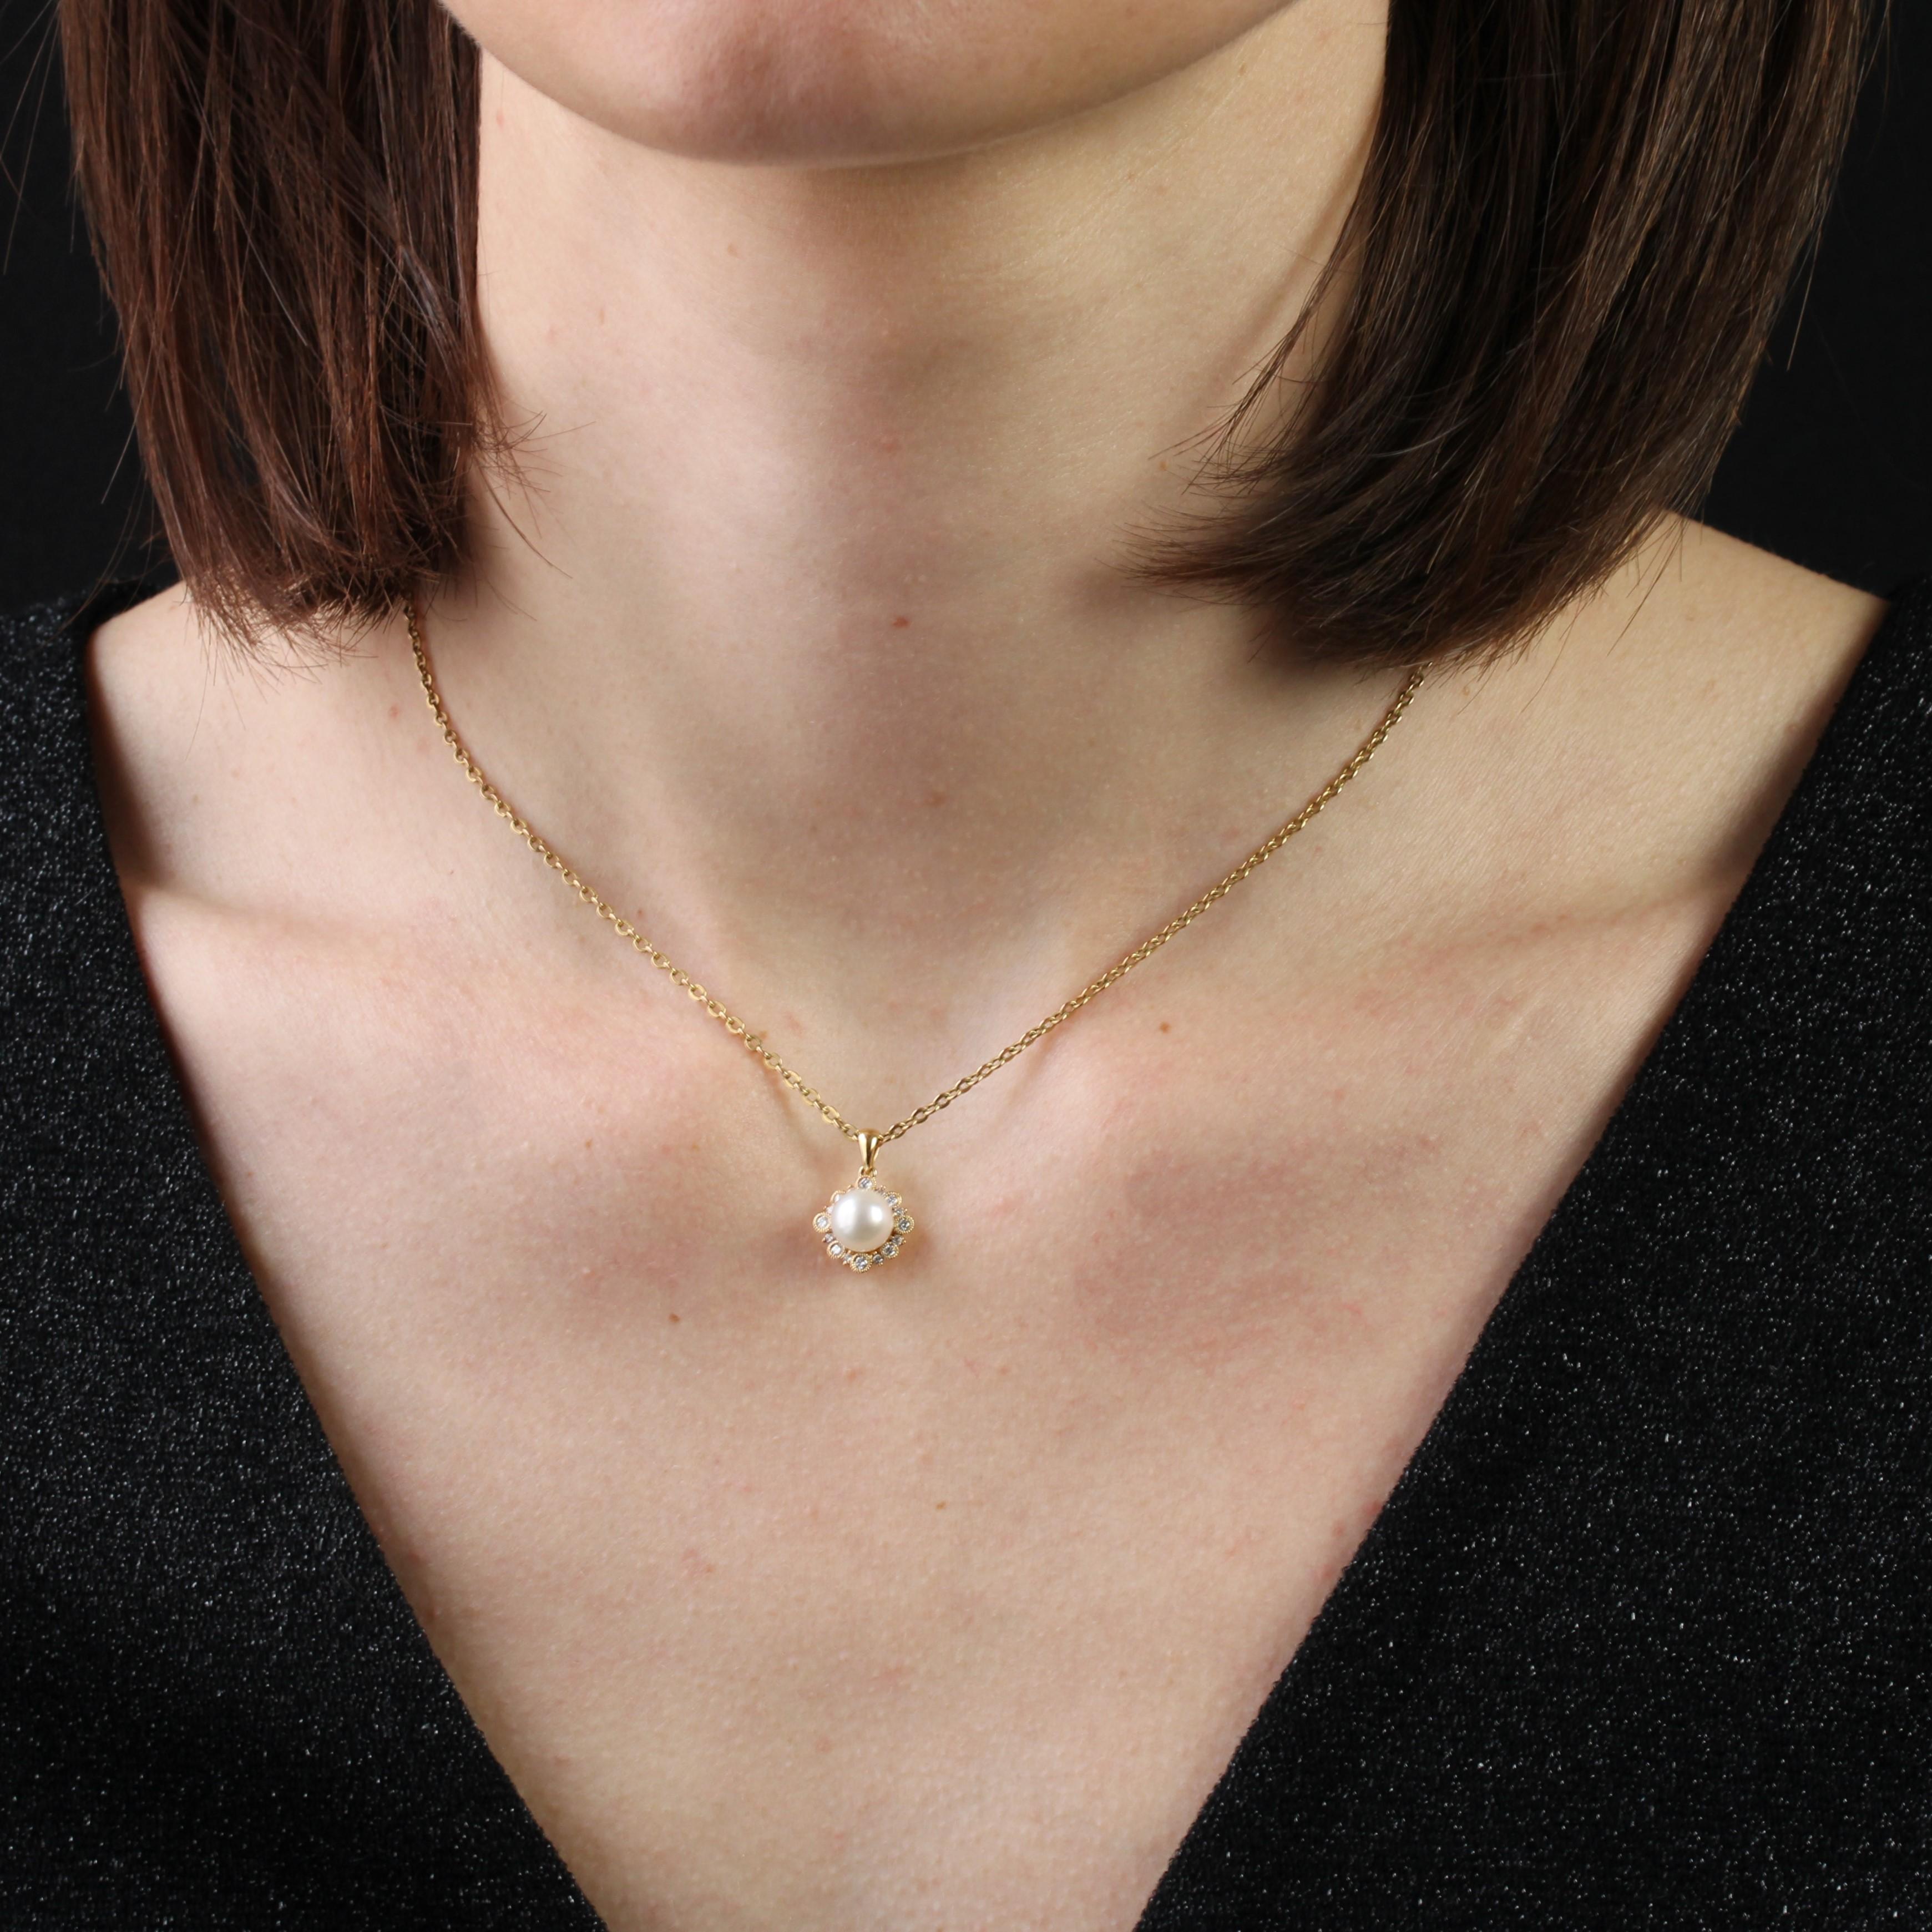 Pendant in 18 karat yellow gold.
This elegant pearl pendant is set with modern brilliant-cut diamonds in alternating claw and millegrain settings. A round Akoya cultured pearl with a pearly white orient is set in the center.
Total weight of the